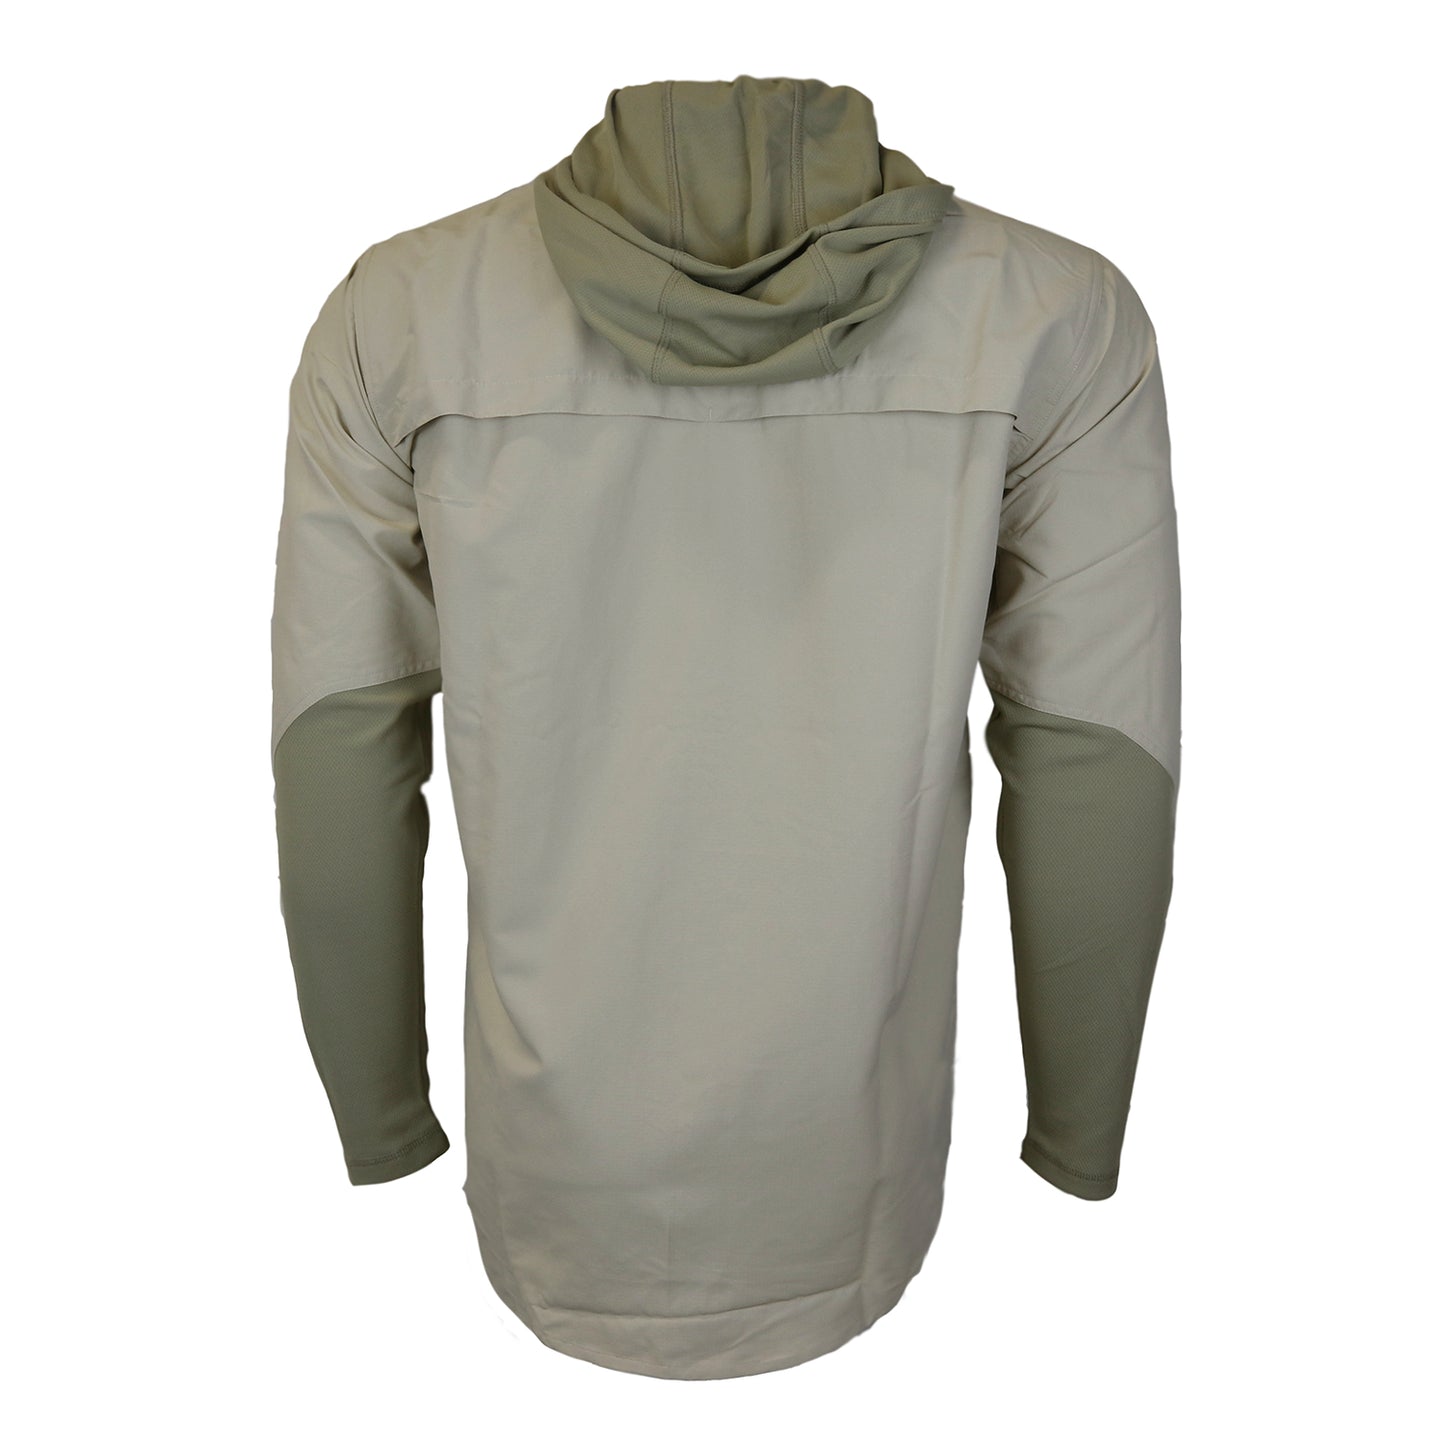 Back view of a tan button down shirt with crew sleeves, a collar and a hood down over the back.